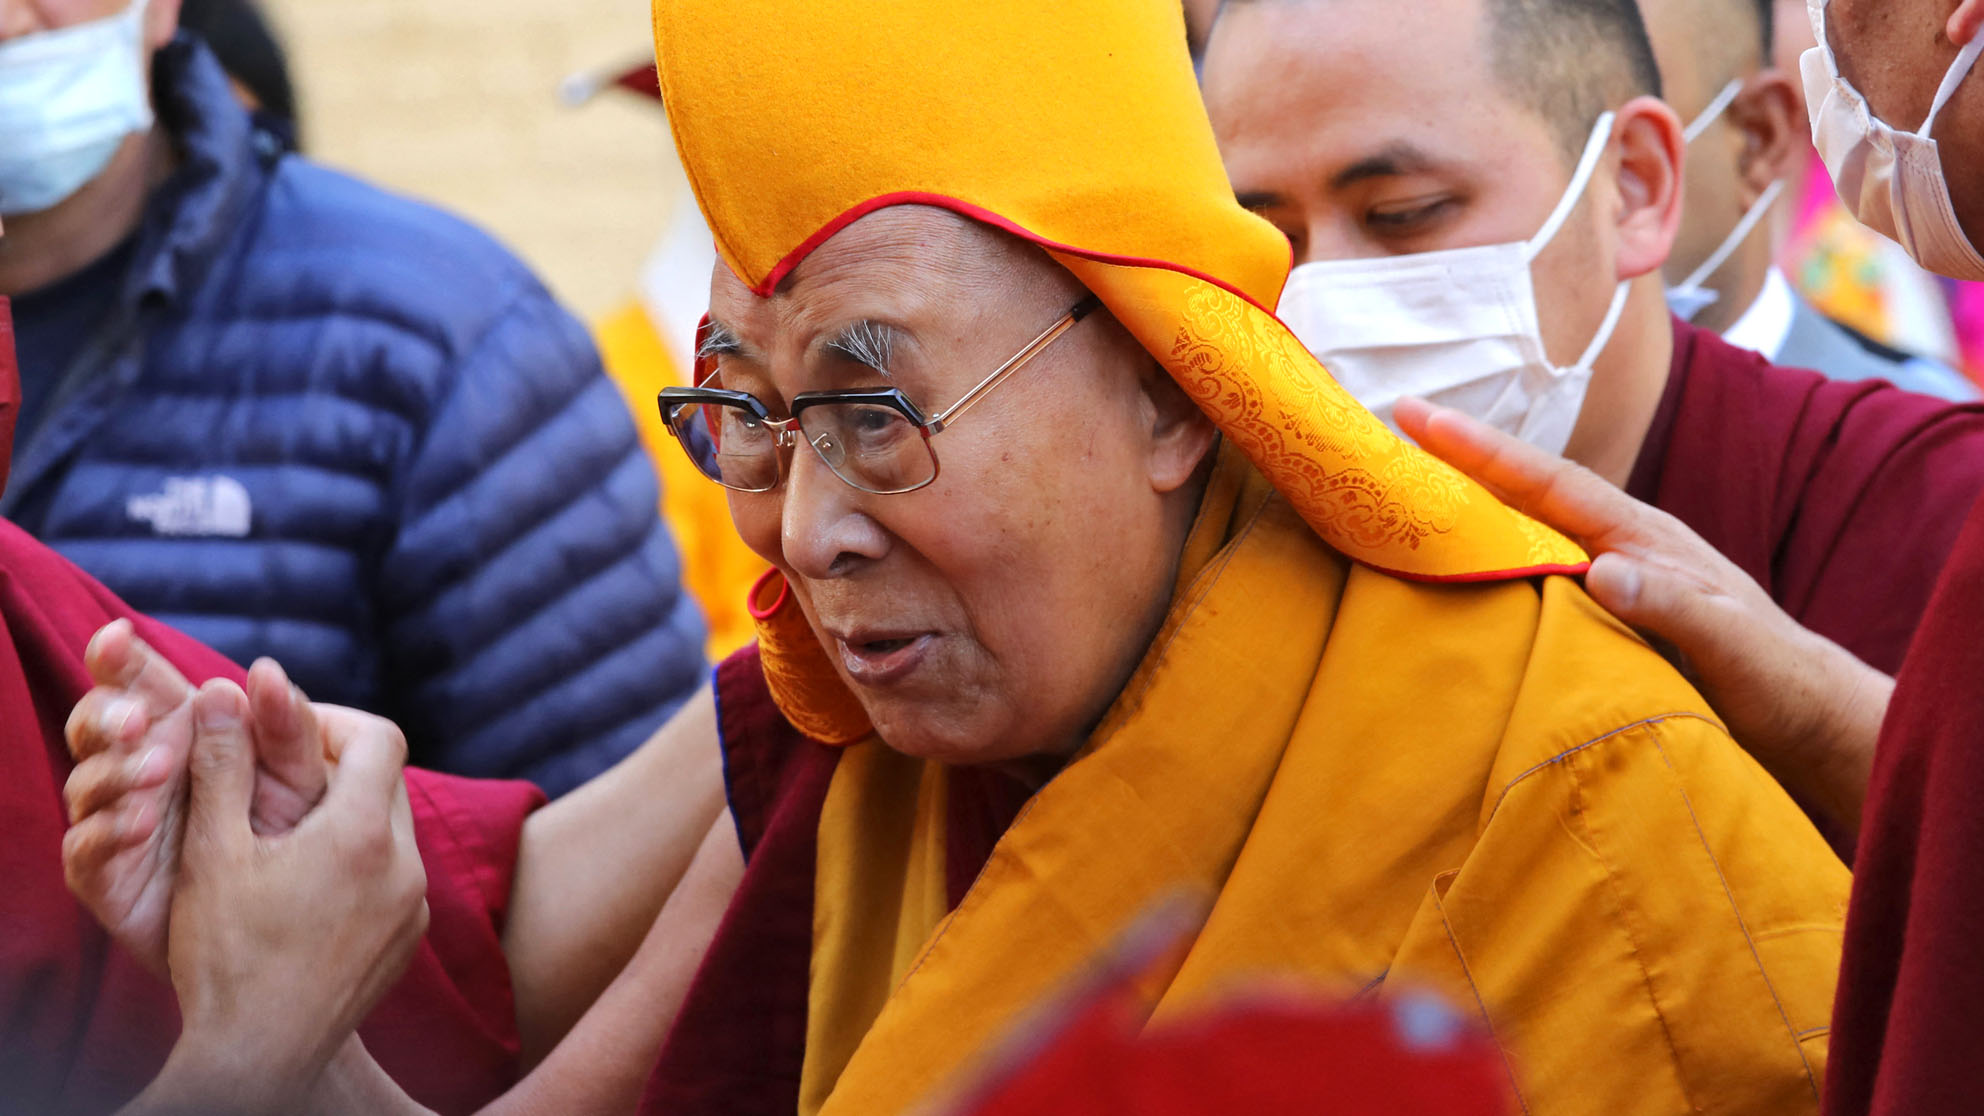 Dalai Lama Apologizes After Video Shows Him Kissing Young Boy On Mouth, Asking Him To Suck His Tongue